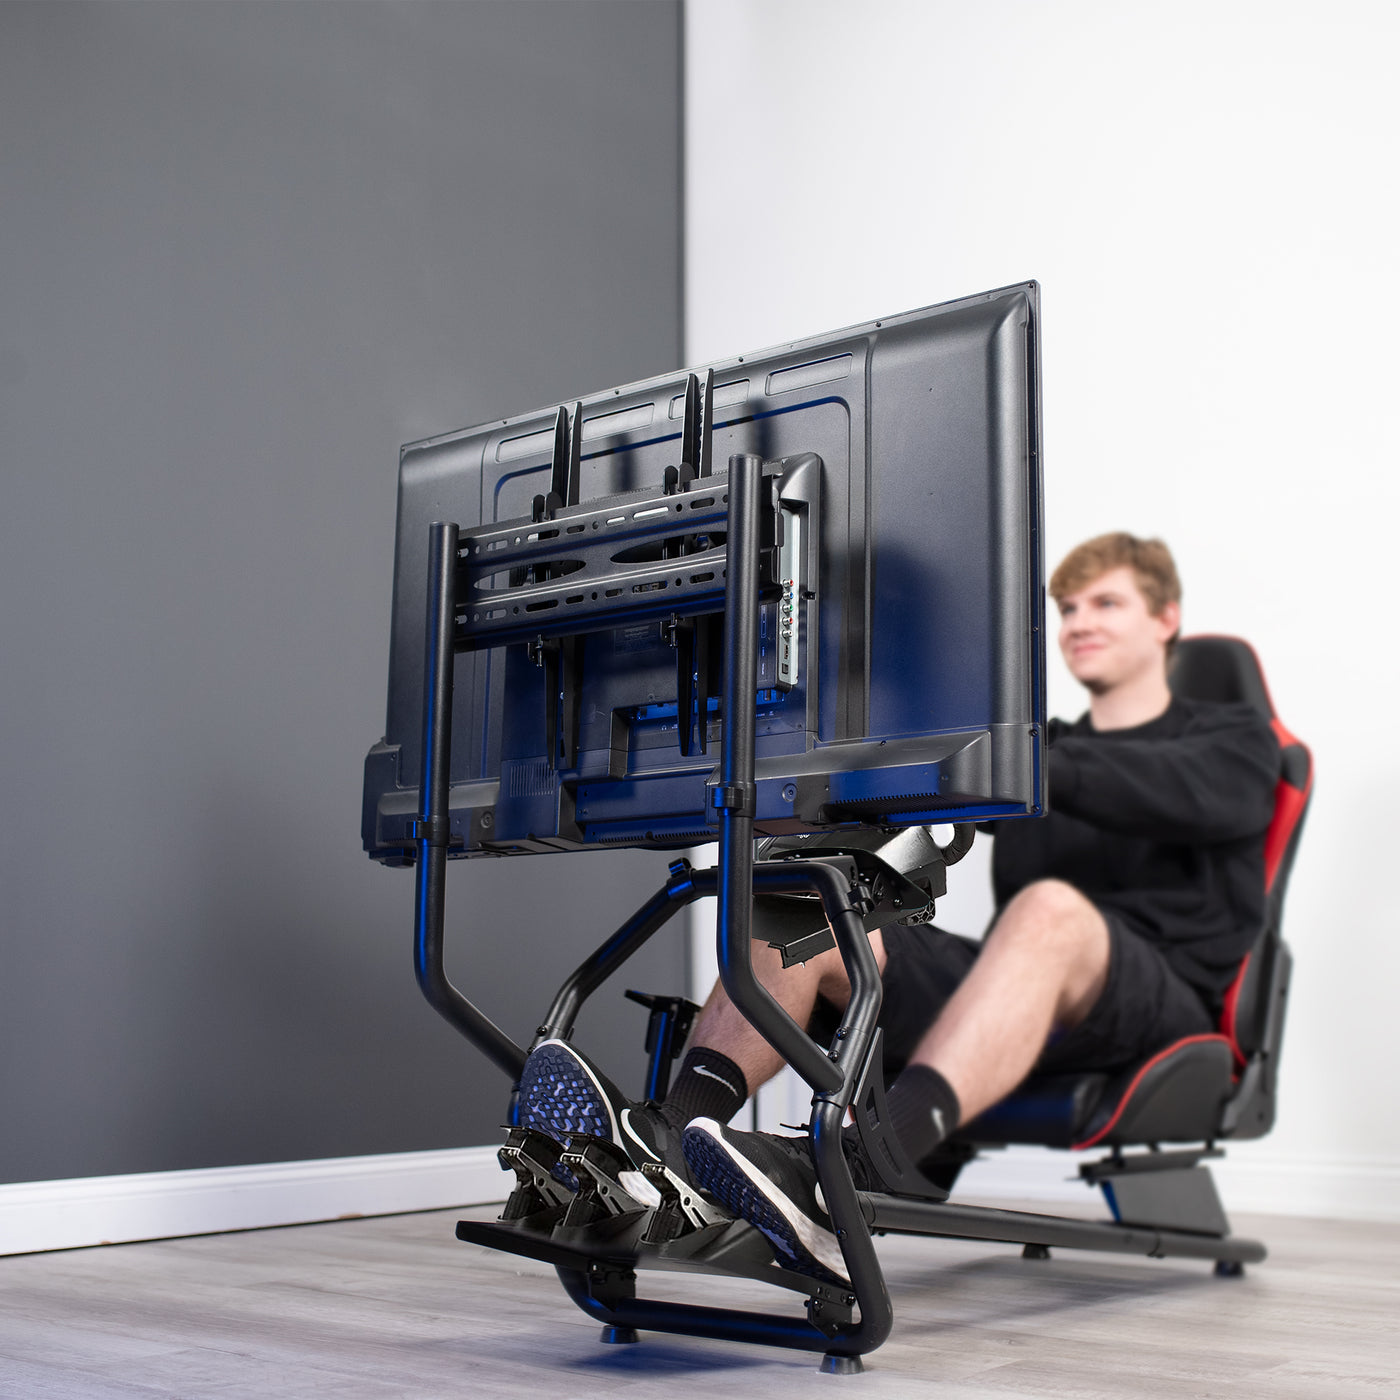 A person at a race gaming setup in the comfort of a home.